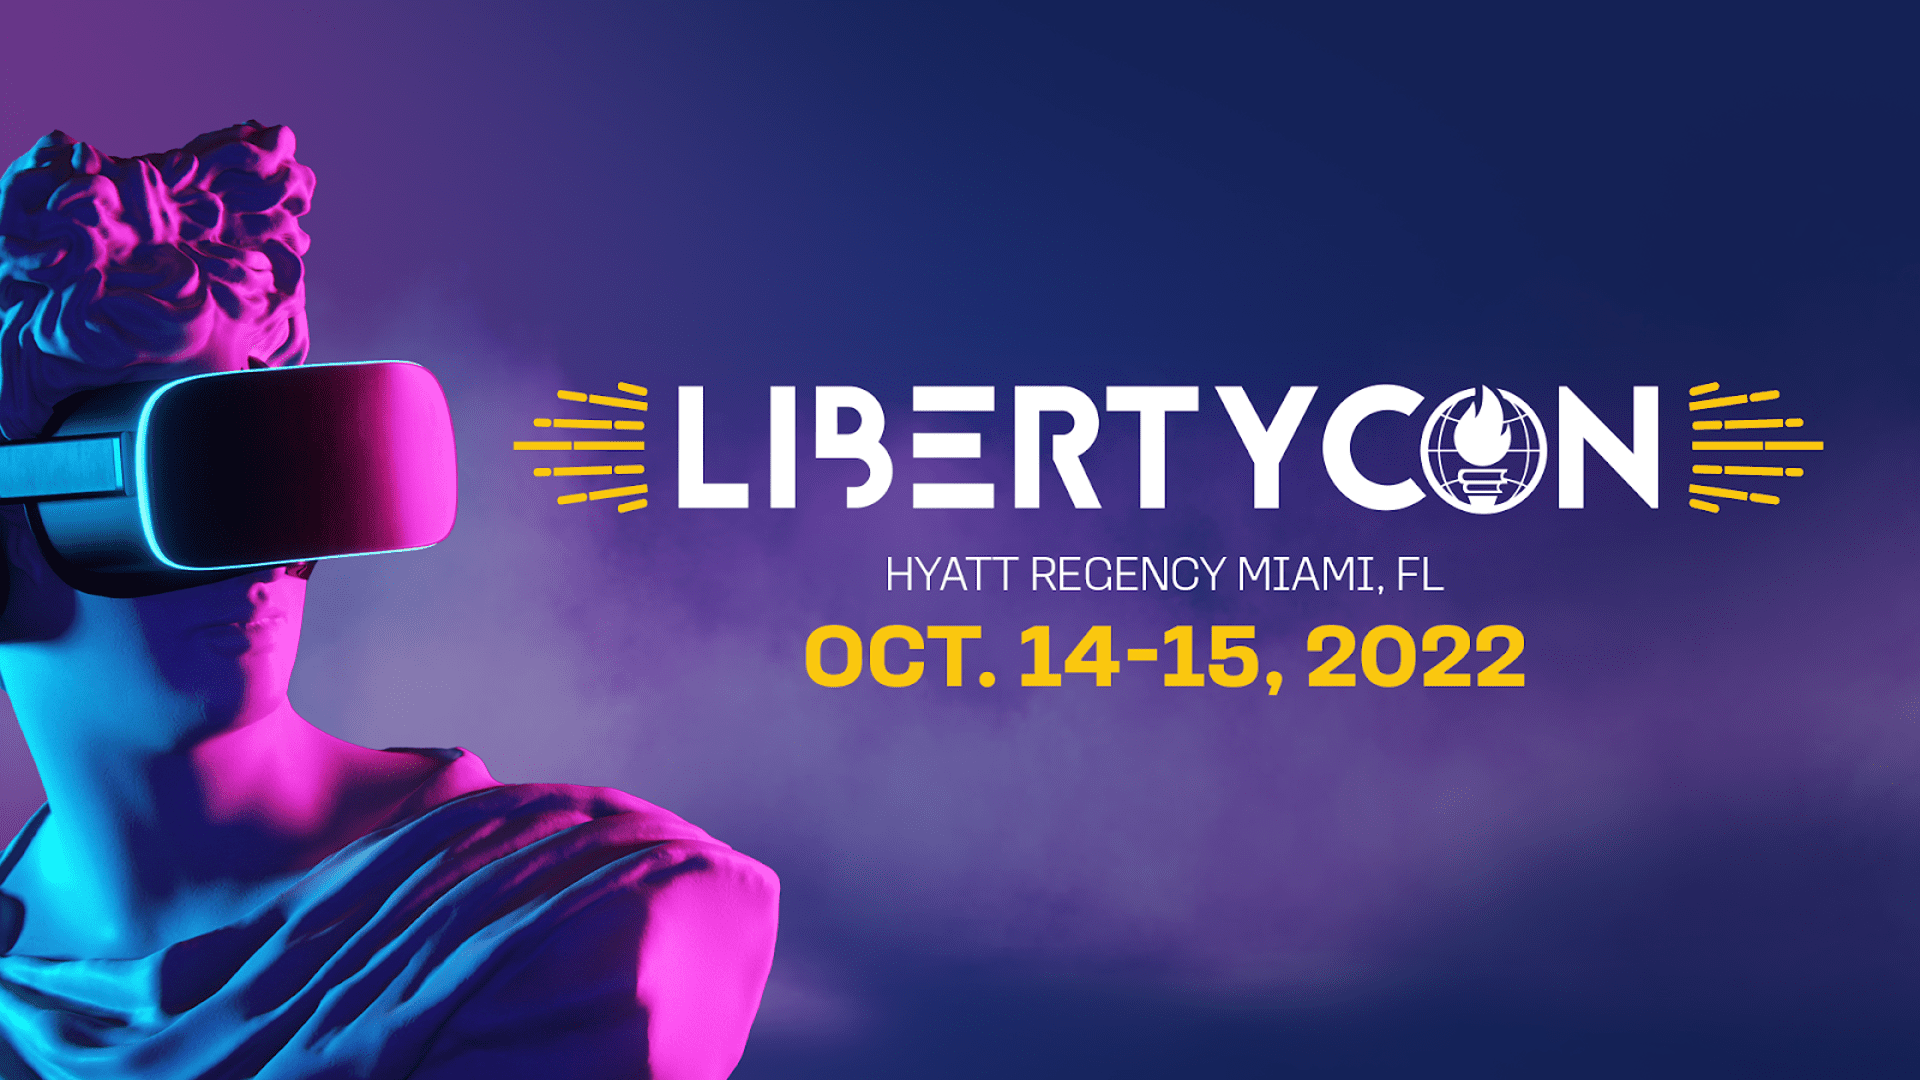 With over 30 confirmed so far, here is just a small selection of the fantastic speakers you don’t want to miss at LibertyCon International this year: